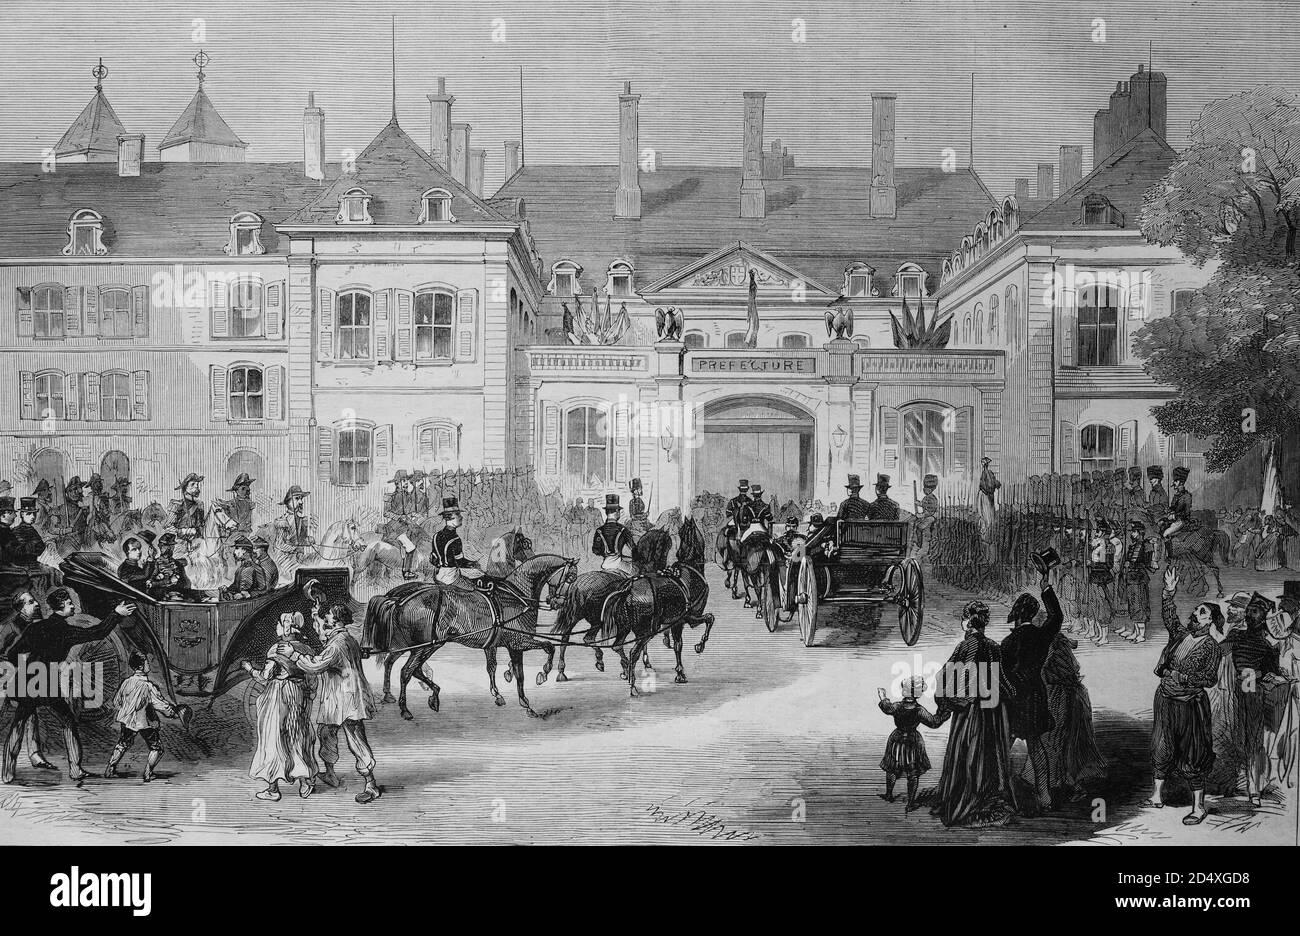 Arrival of Napoleon III and the imperial prince in Metz on July 28th, 1870, illustrated war history, German - French war 1870-1871 Stock Photo